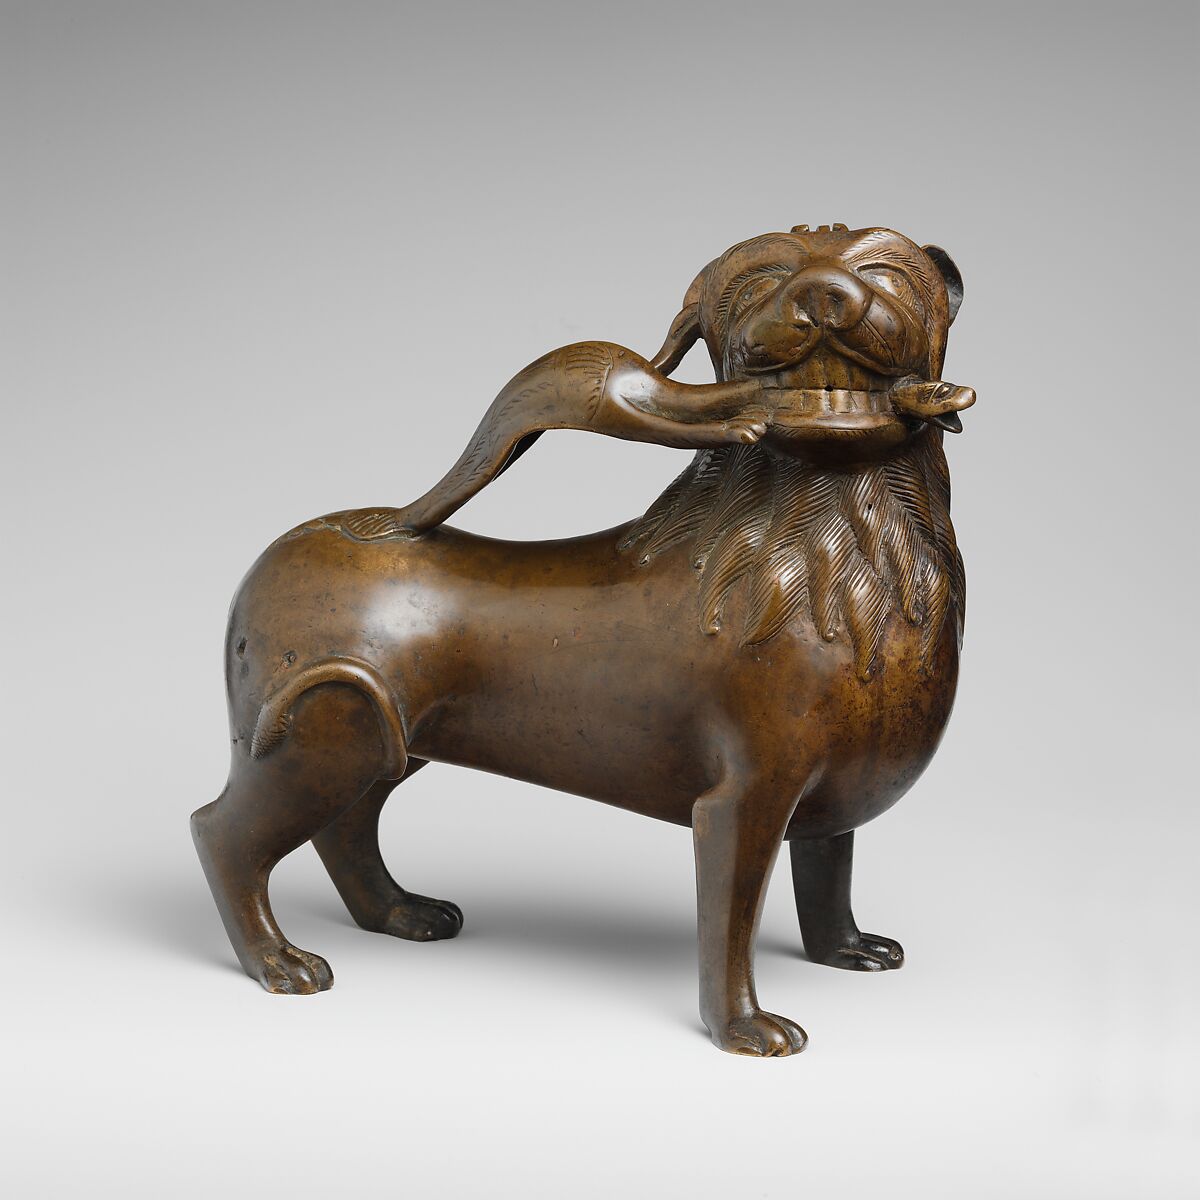 Aquamanile in the Form of a Lion, Copper alloy, North German 